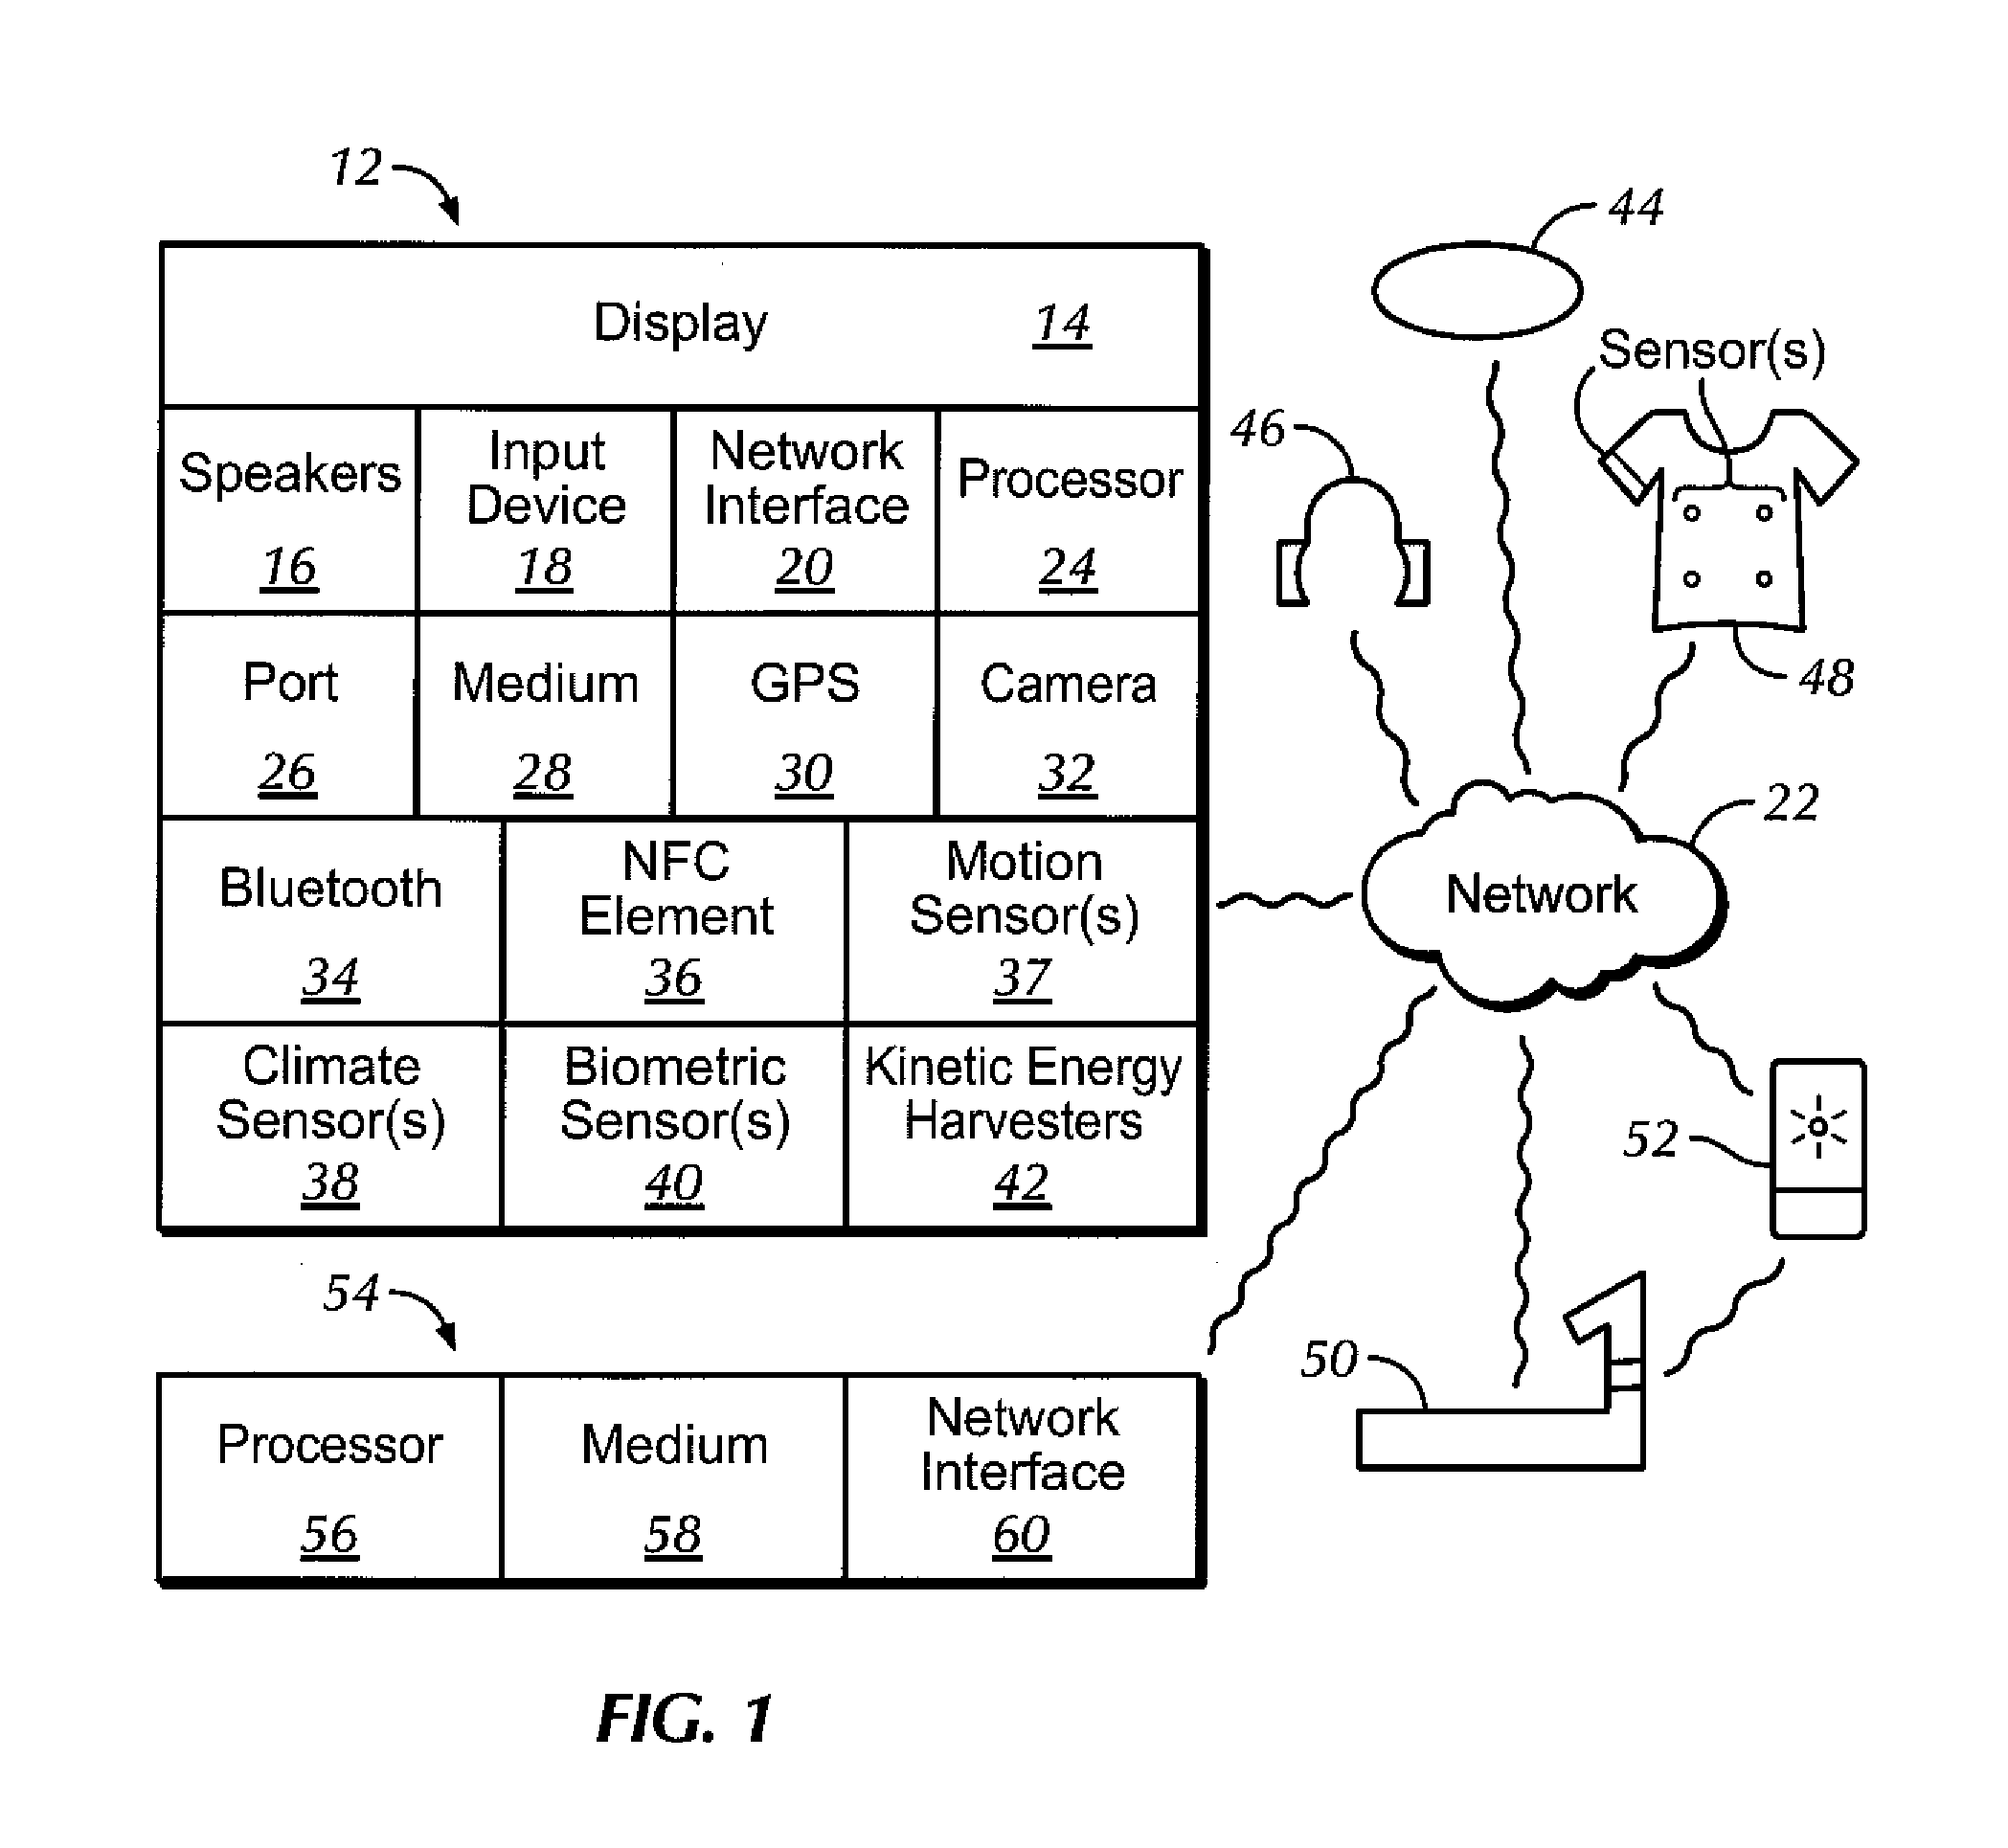 Altering exercise routes based on device determined information